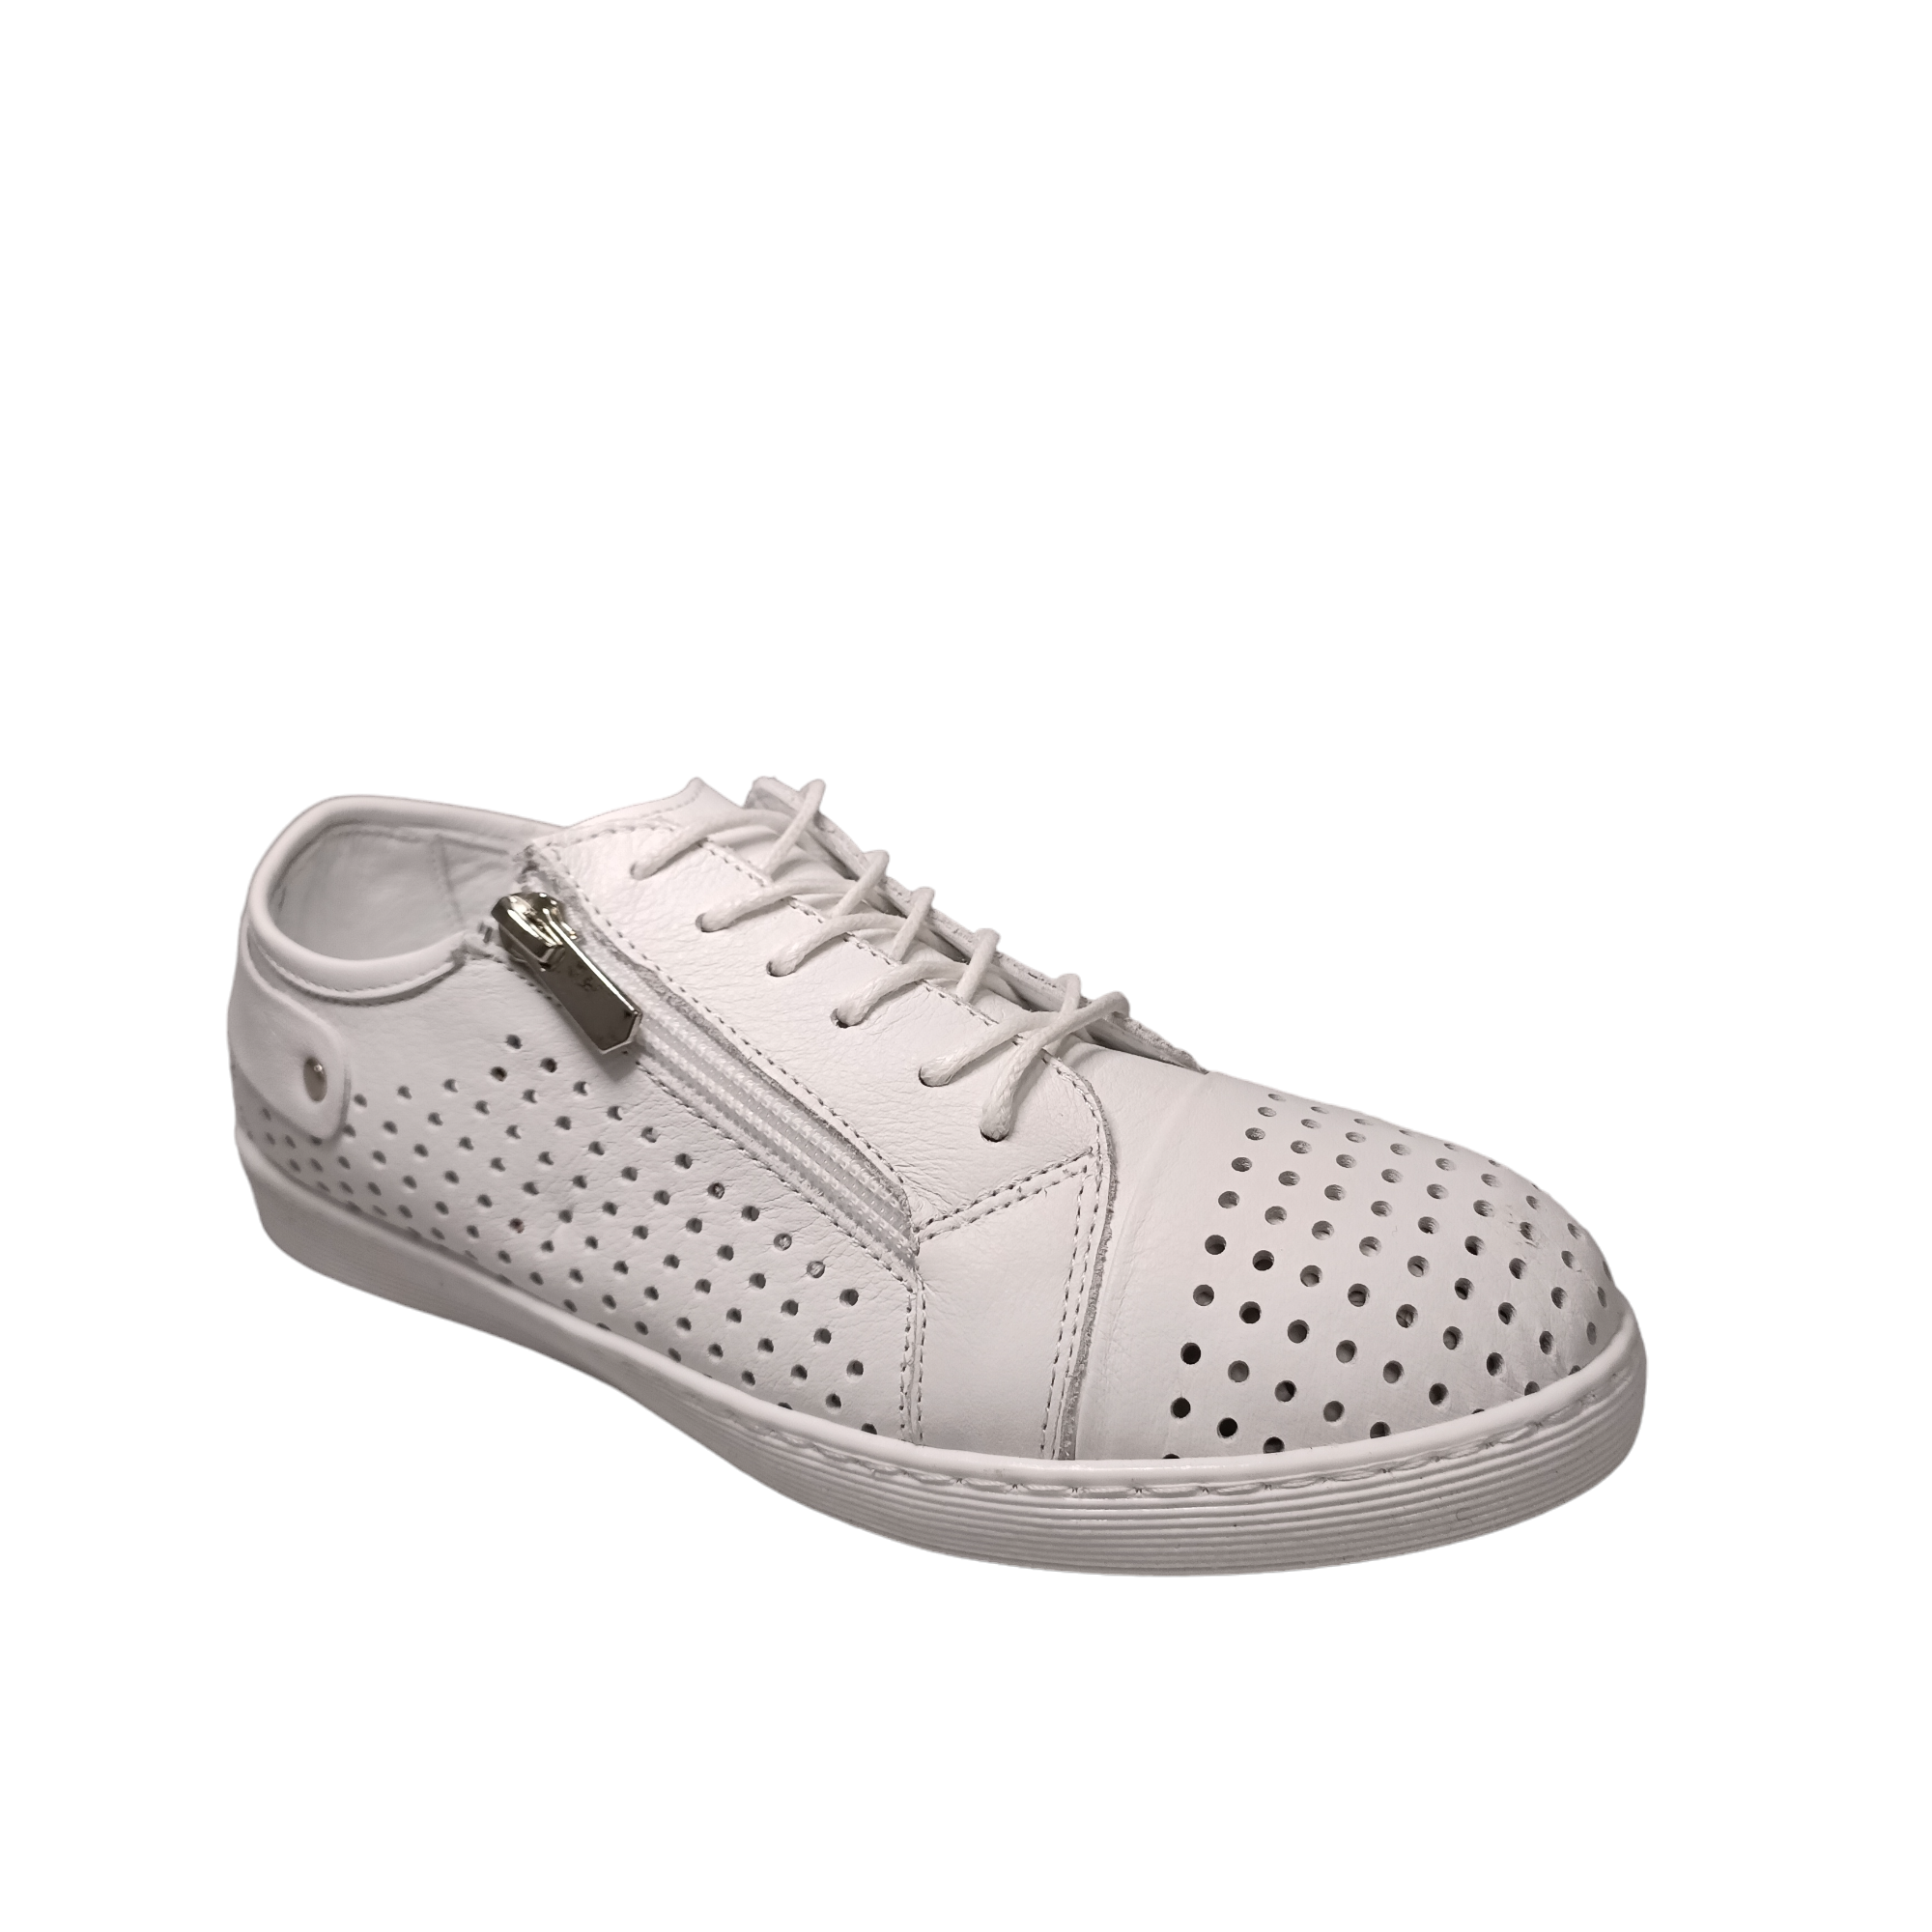 EG17 - shoe&me - Cabello - Sneakers - Sneakers, Summer, Womens